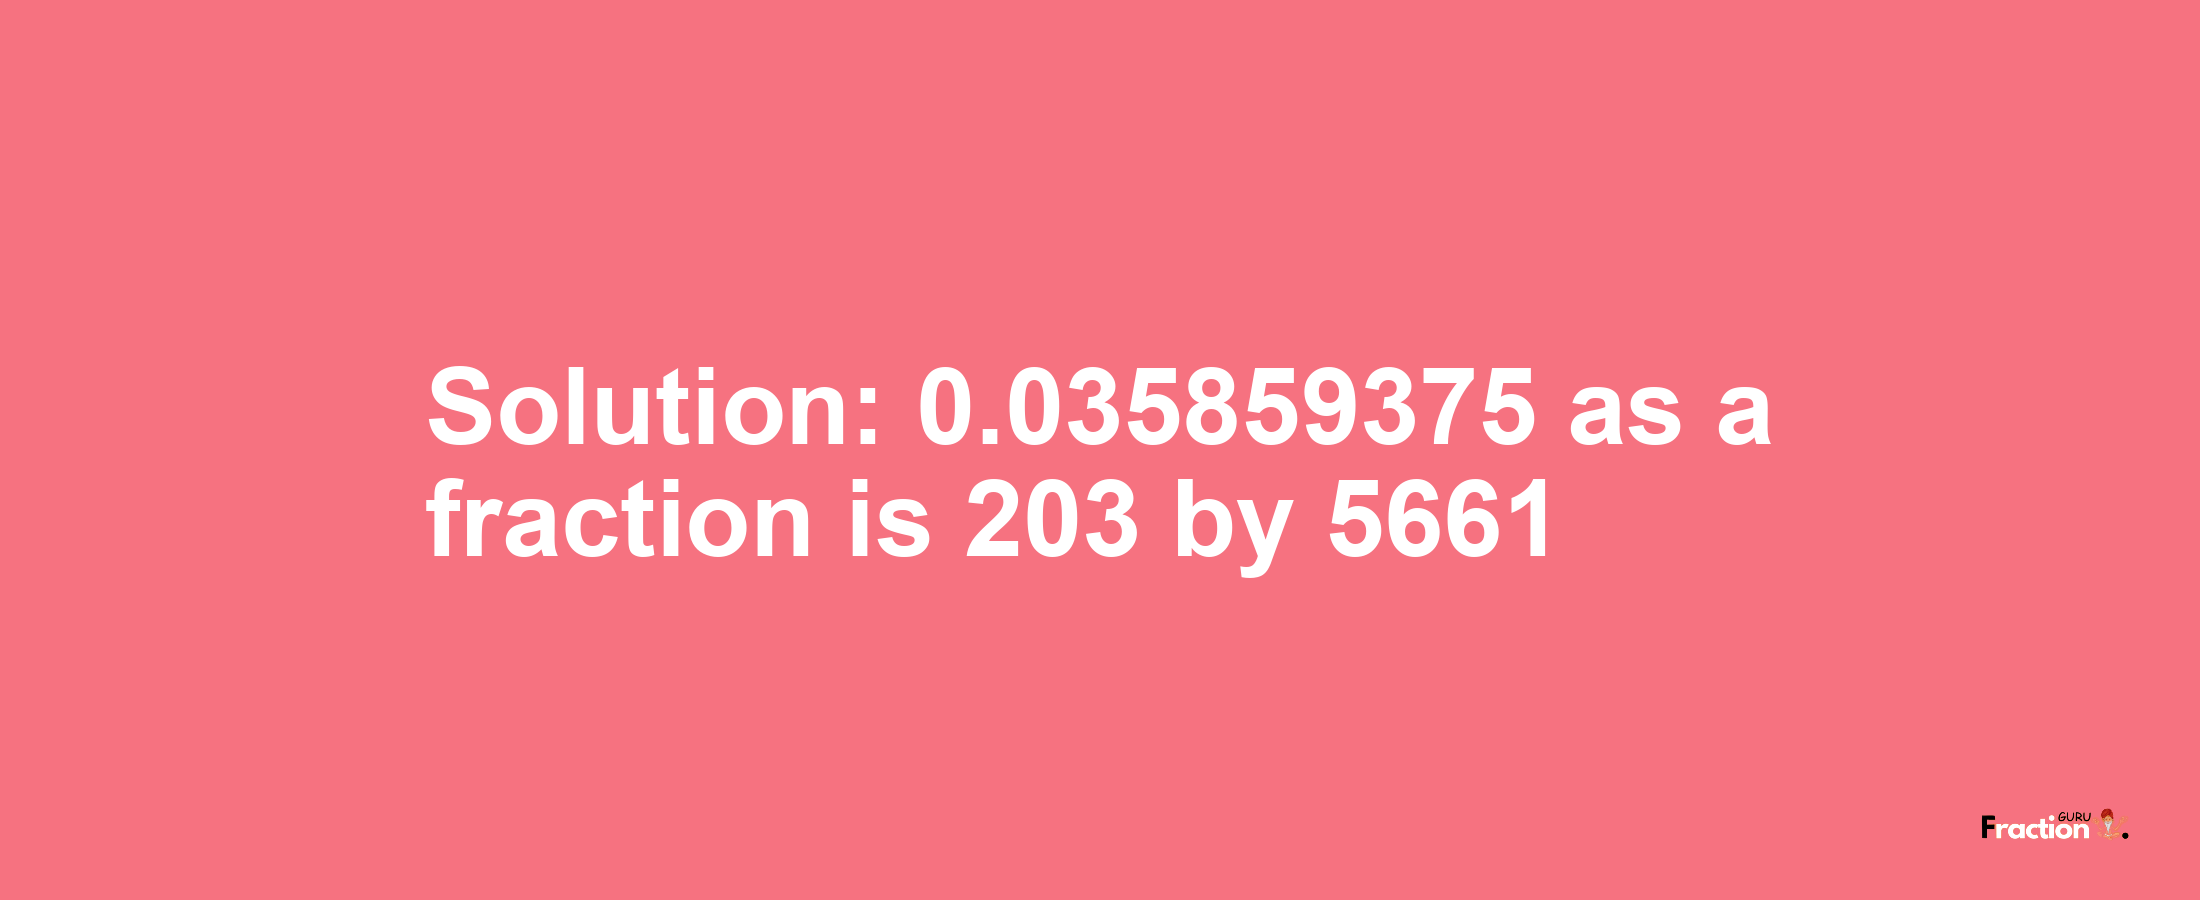 Solution:0.035859375 as a fraction is 203/5661